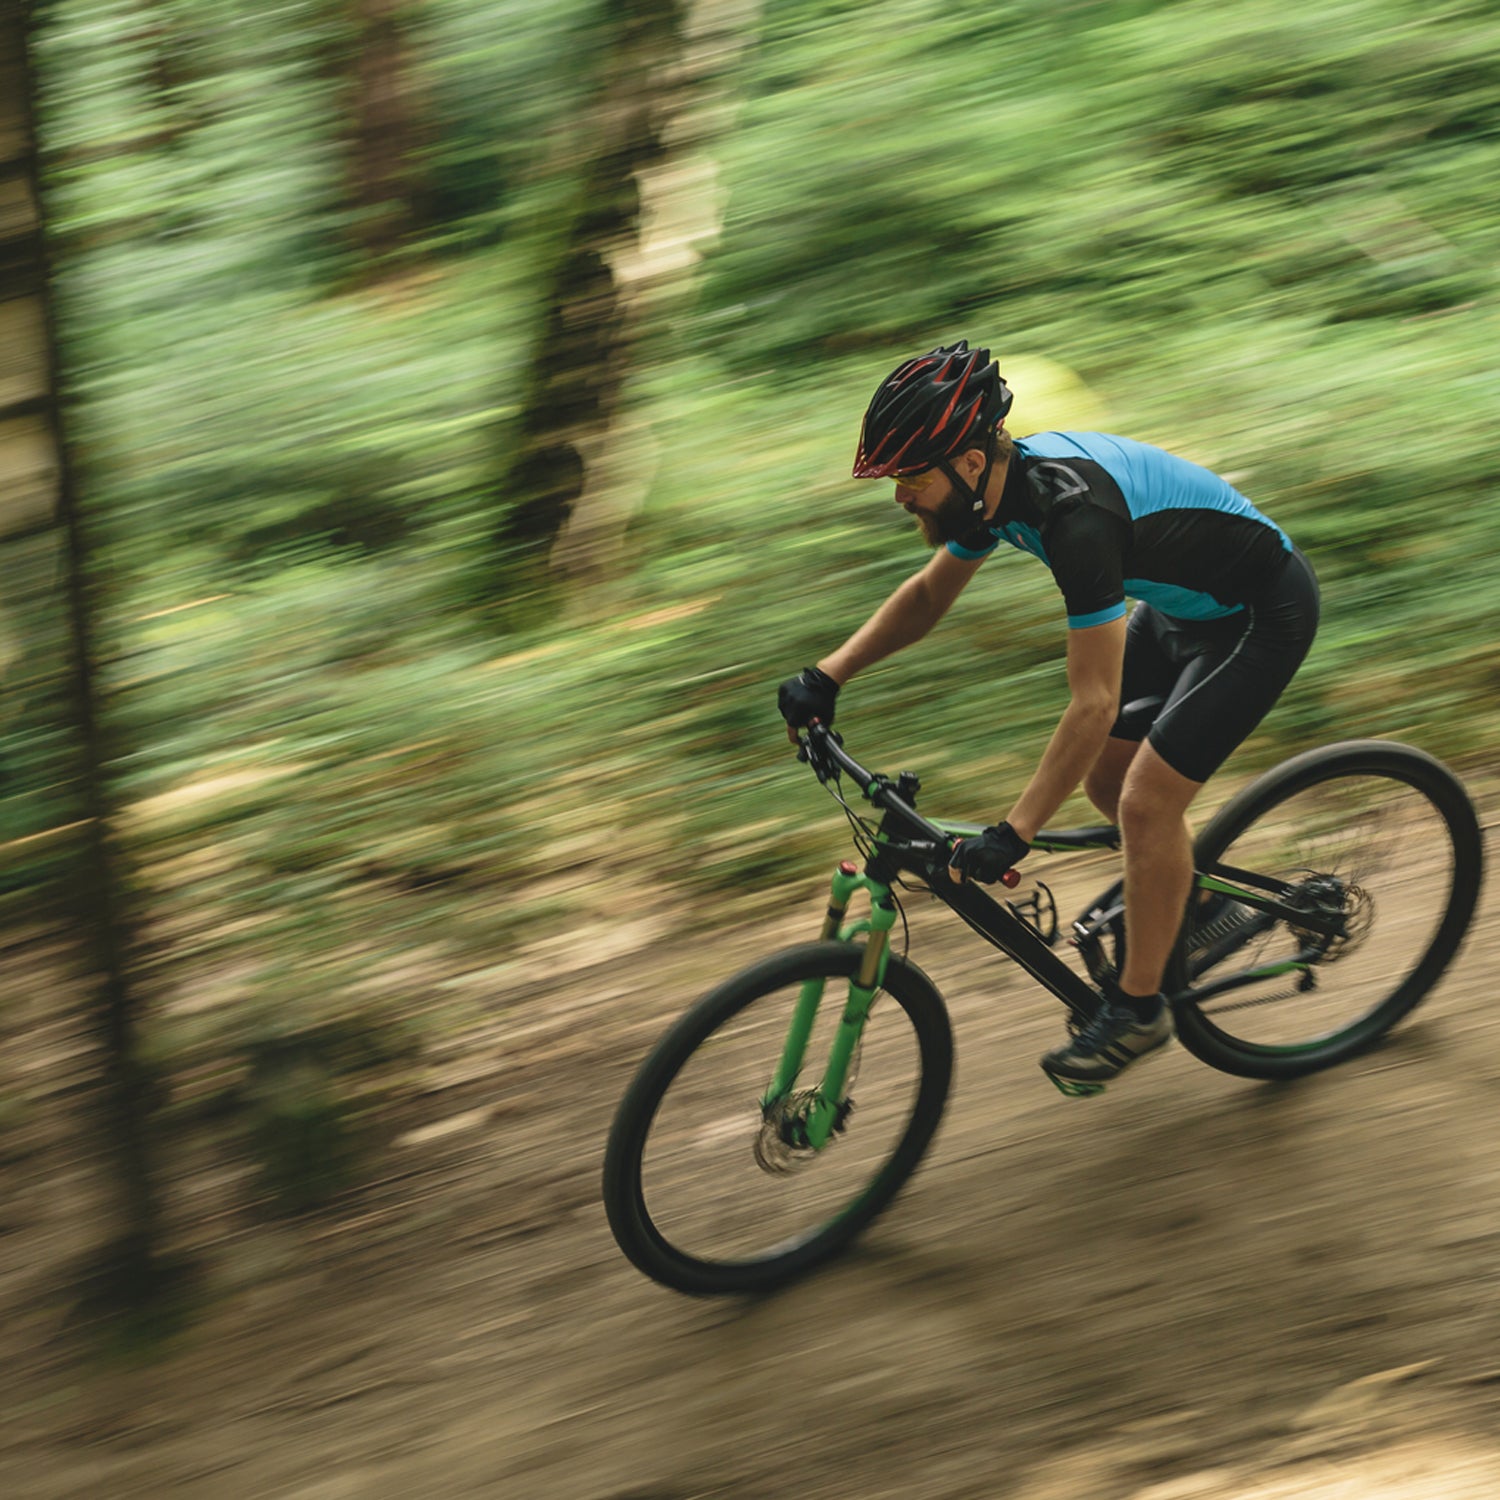 The 7 Pieces of Gear You Need to Start Mountain Biking